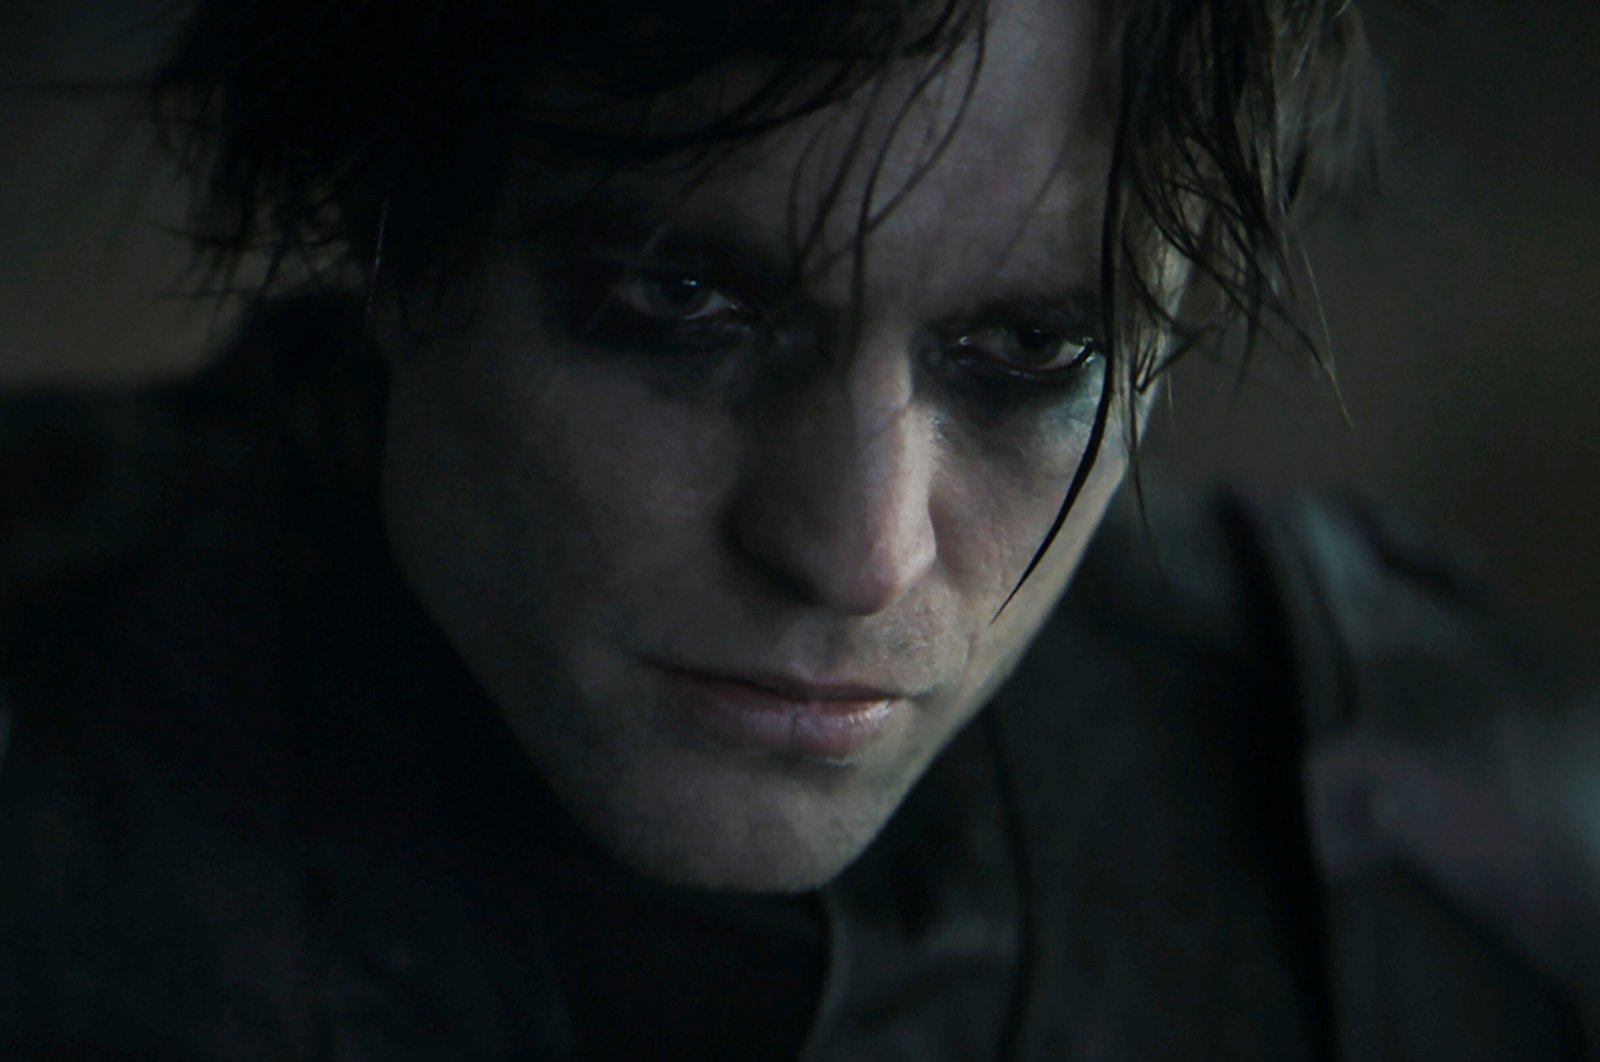 Robert Pattinson as the Dark Knight, in a scene from the film "The Batman." (Warner Bros. Pictures via AP)